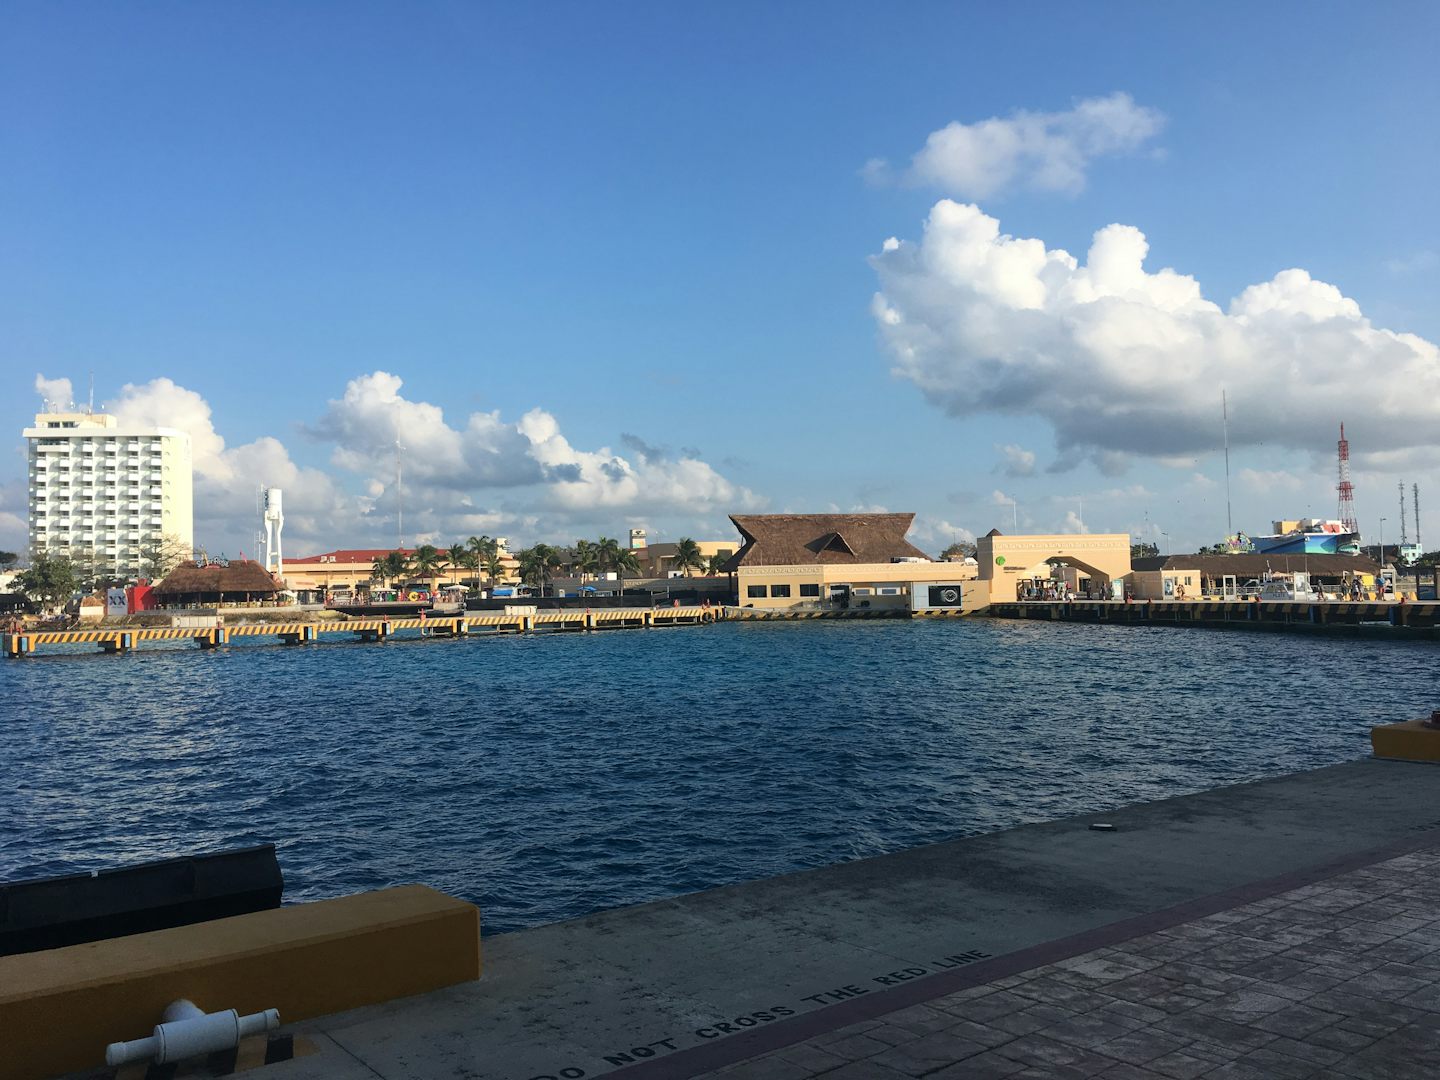 A view of the port in Cozumel.